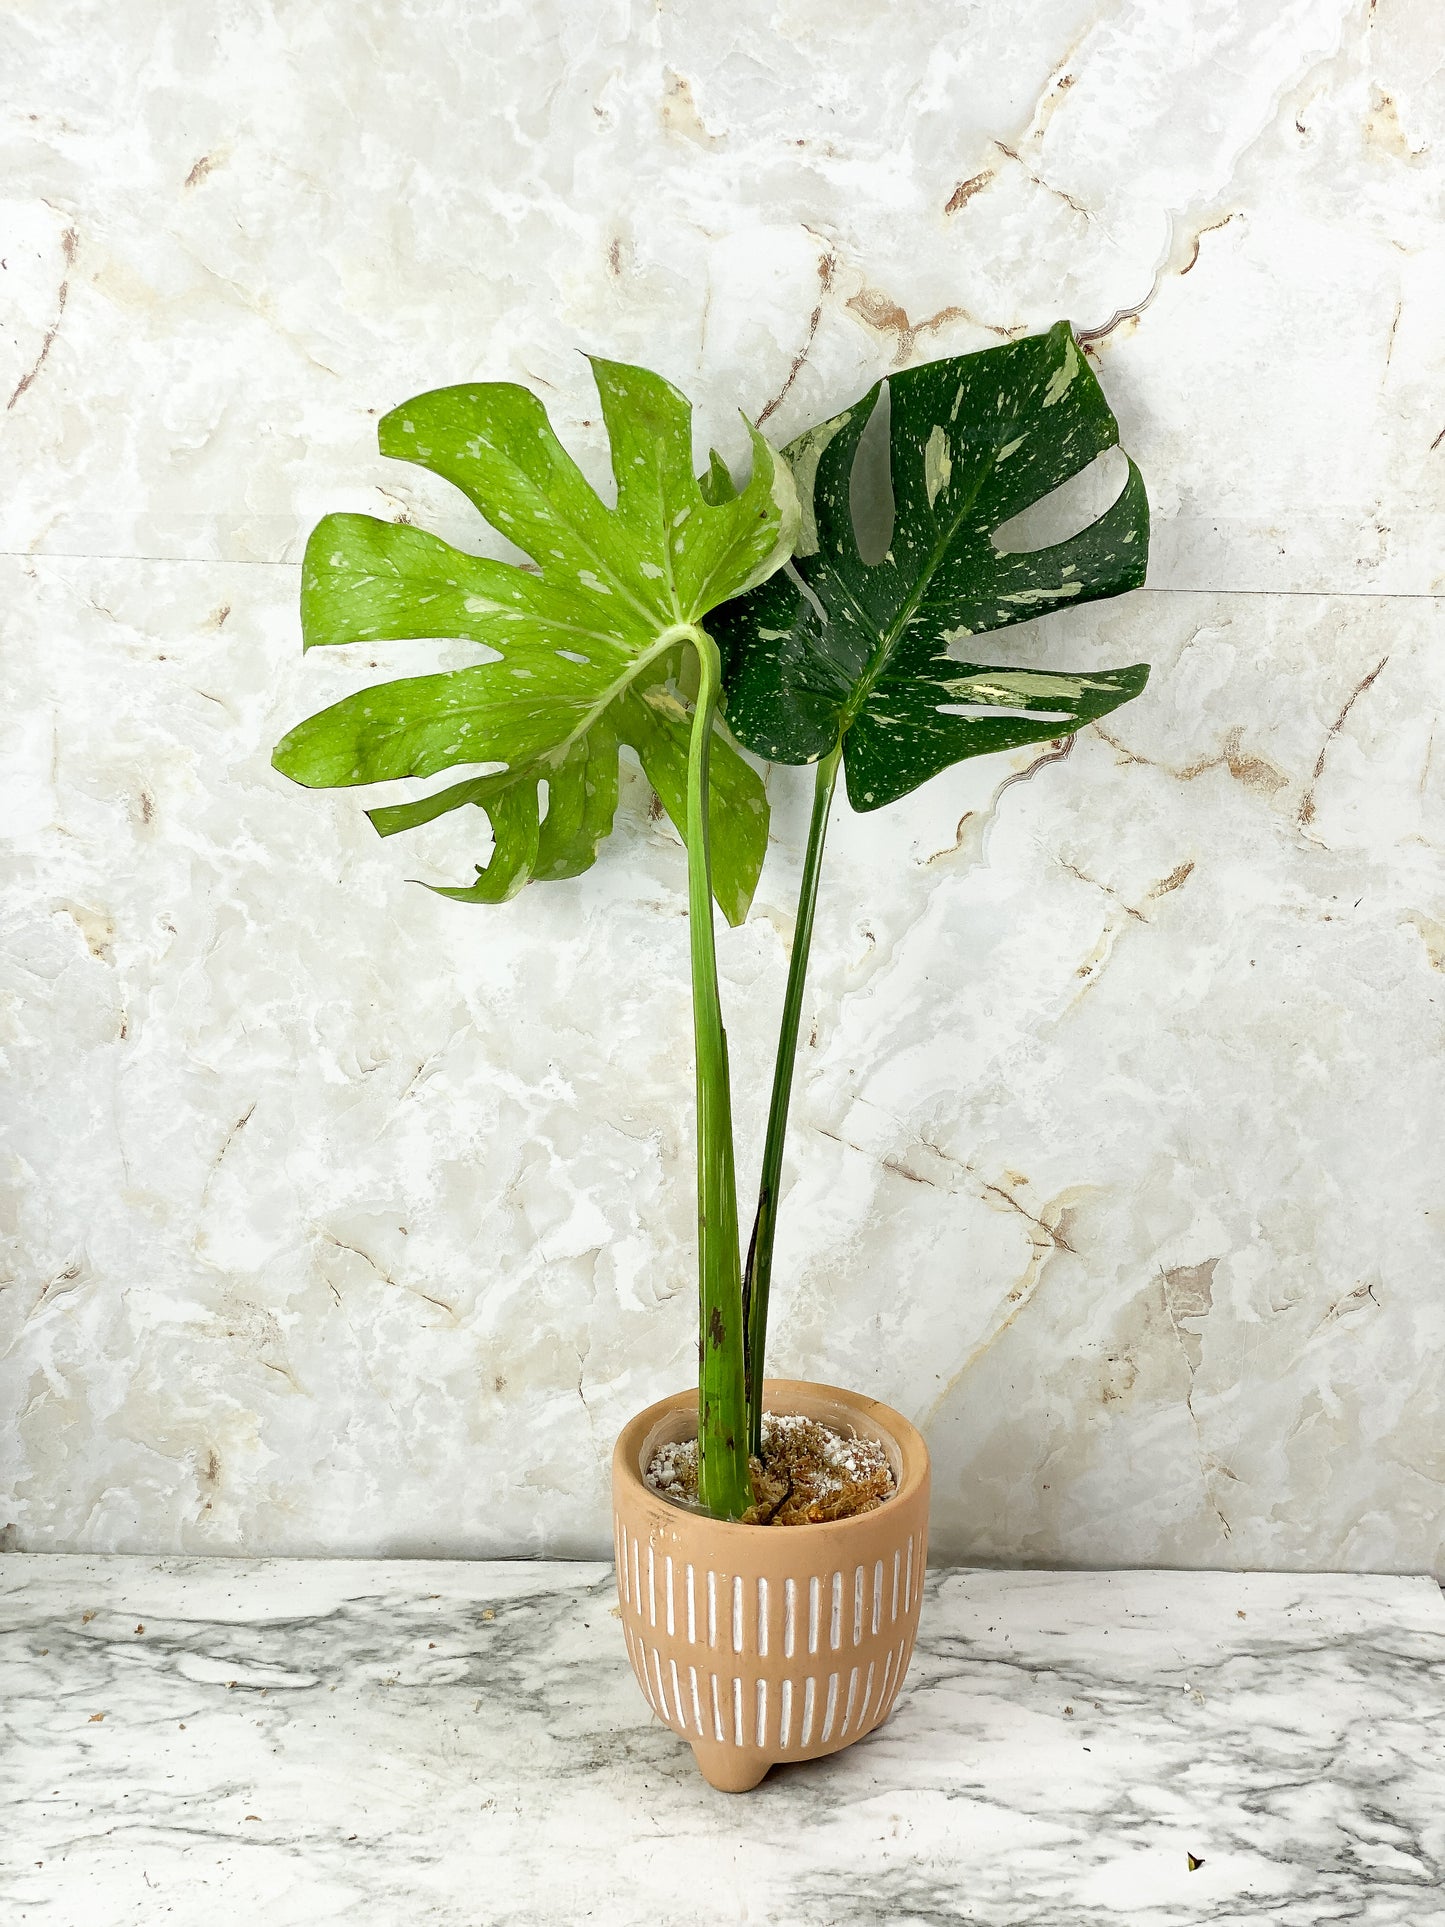 Monstera Thai Constellation Slightly Rooted 2 highly variegated leaves